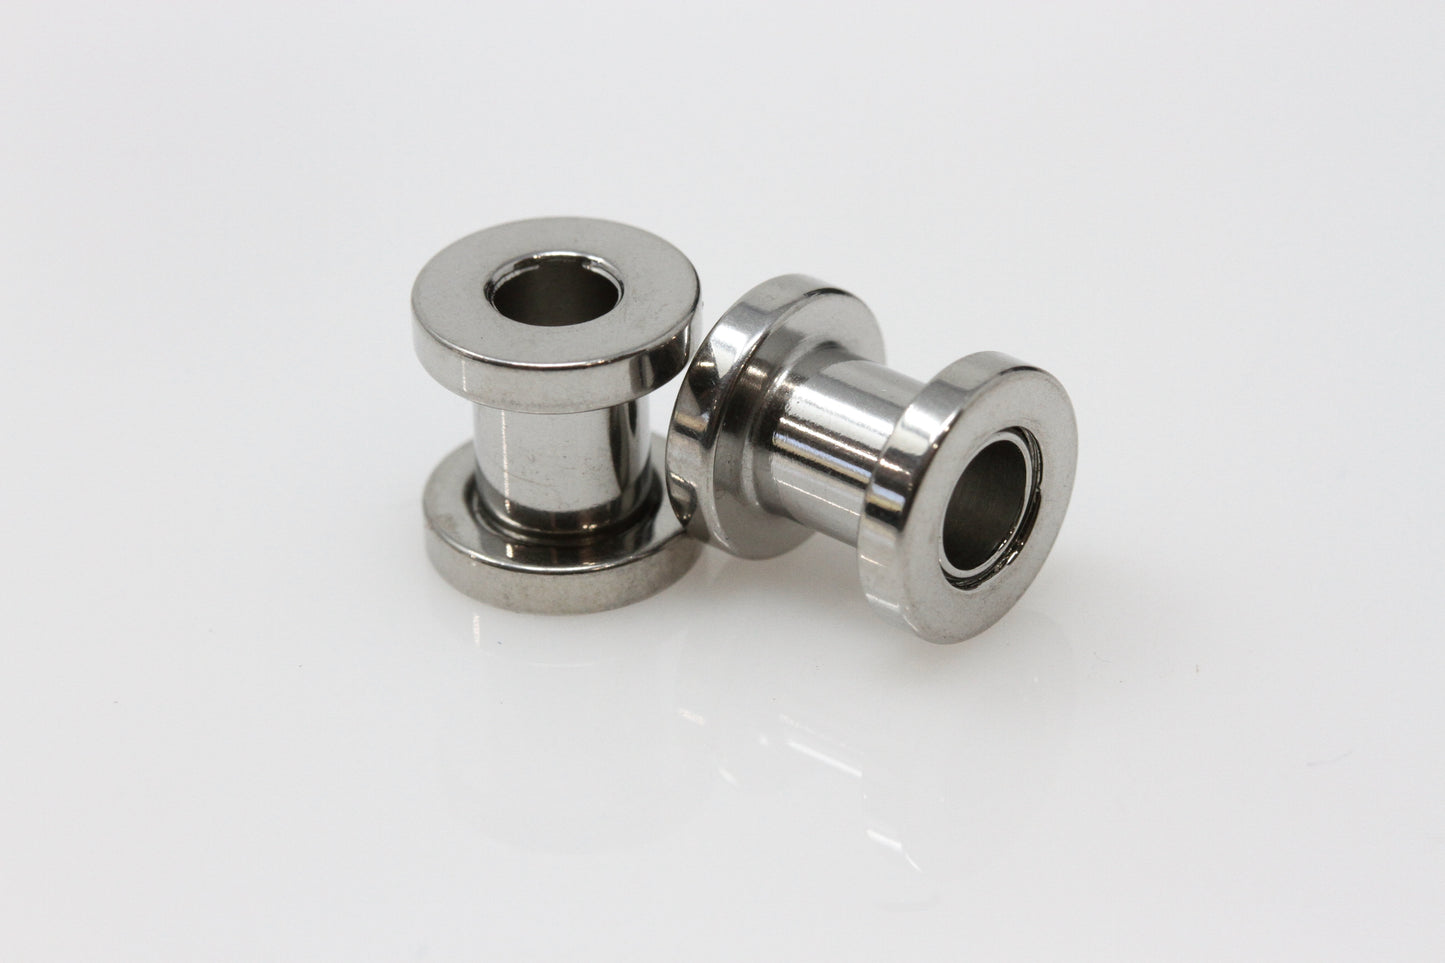 Screw back stainless steel tunnel plugs